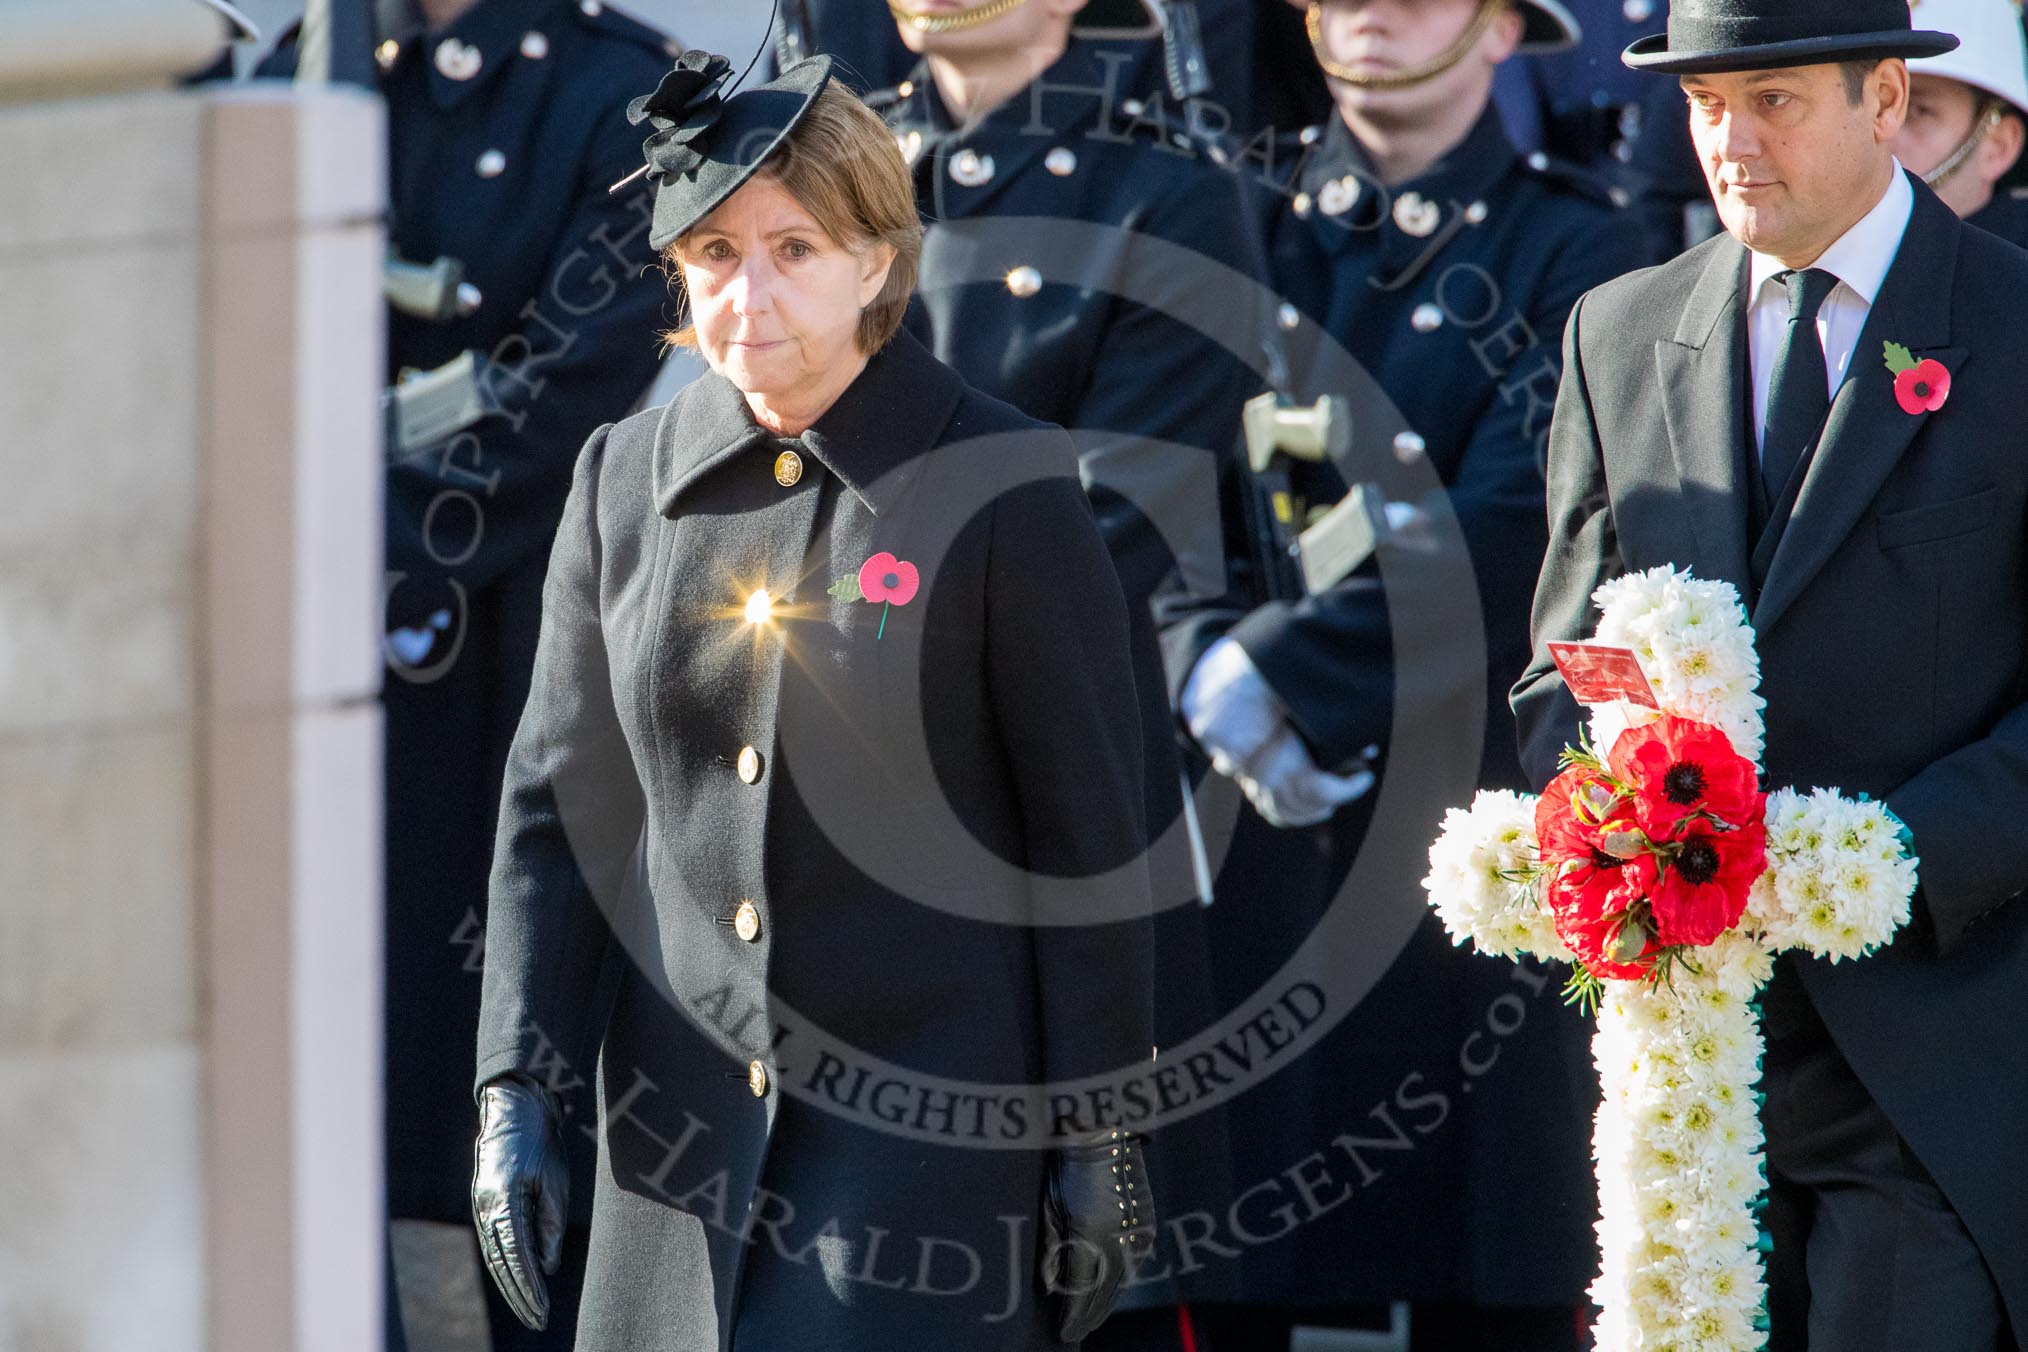 during Remembrance Sunday Cenotaph Ceremony 2018 at Horse Guards Parade, Westminster, London, 11 November 2018, 11:35.